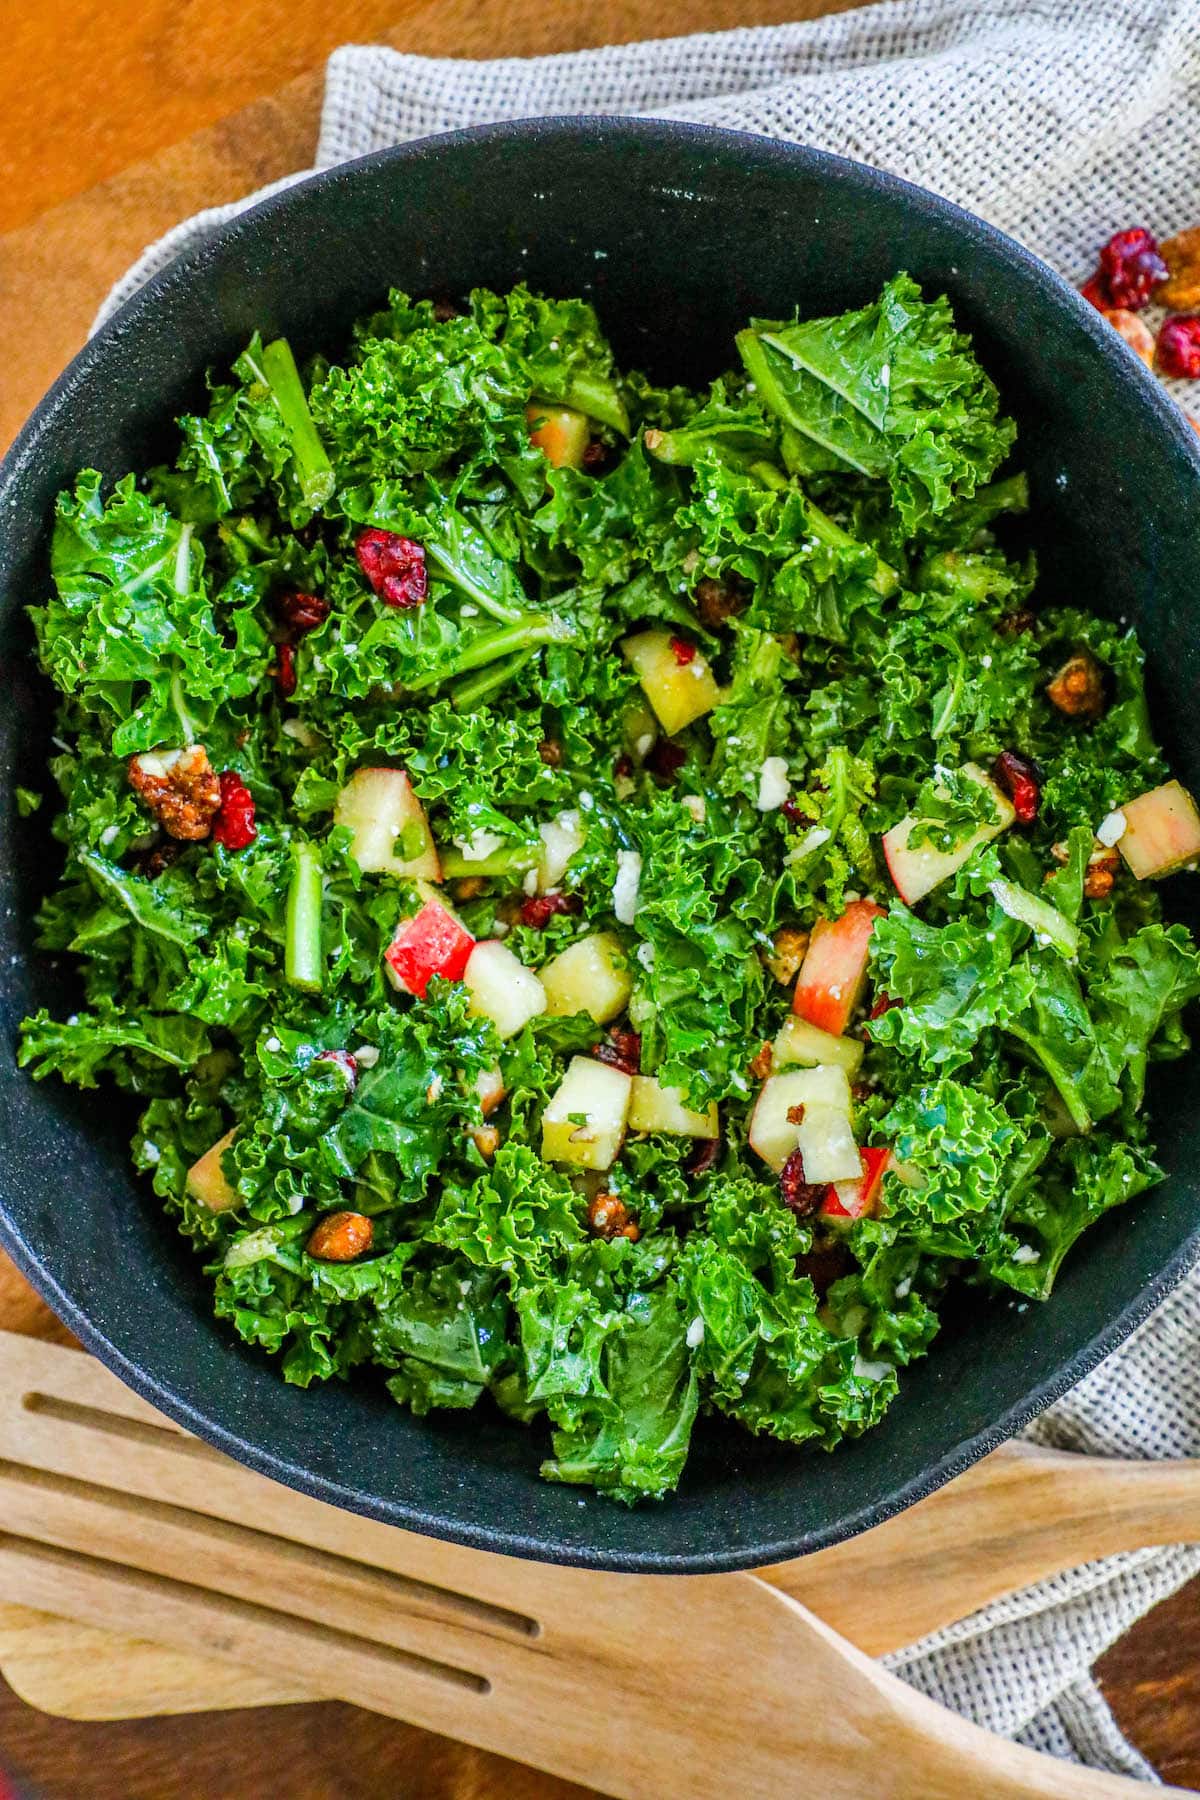 chopped kale, craisins, chopped apples, walnuts, and feta cheese crumbles tossed in dressing in a black bowl on a table next to wooden spoons